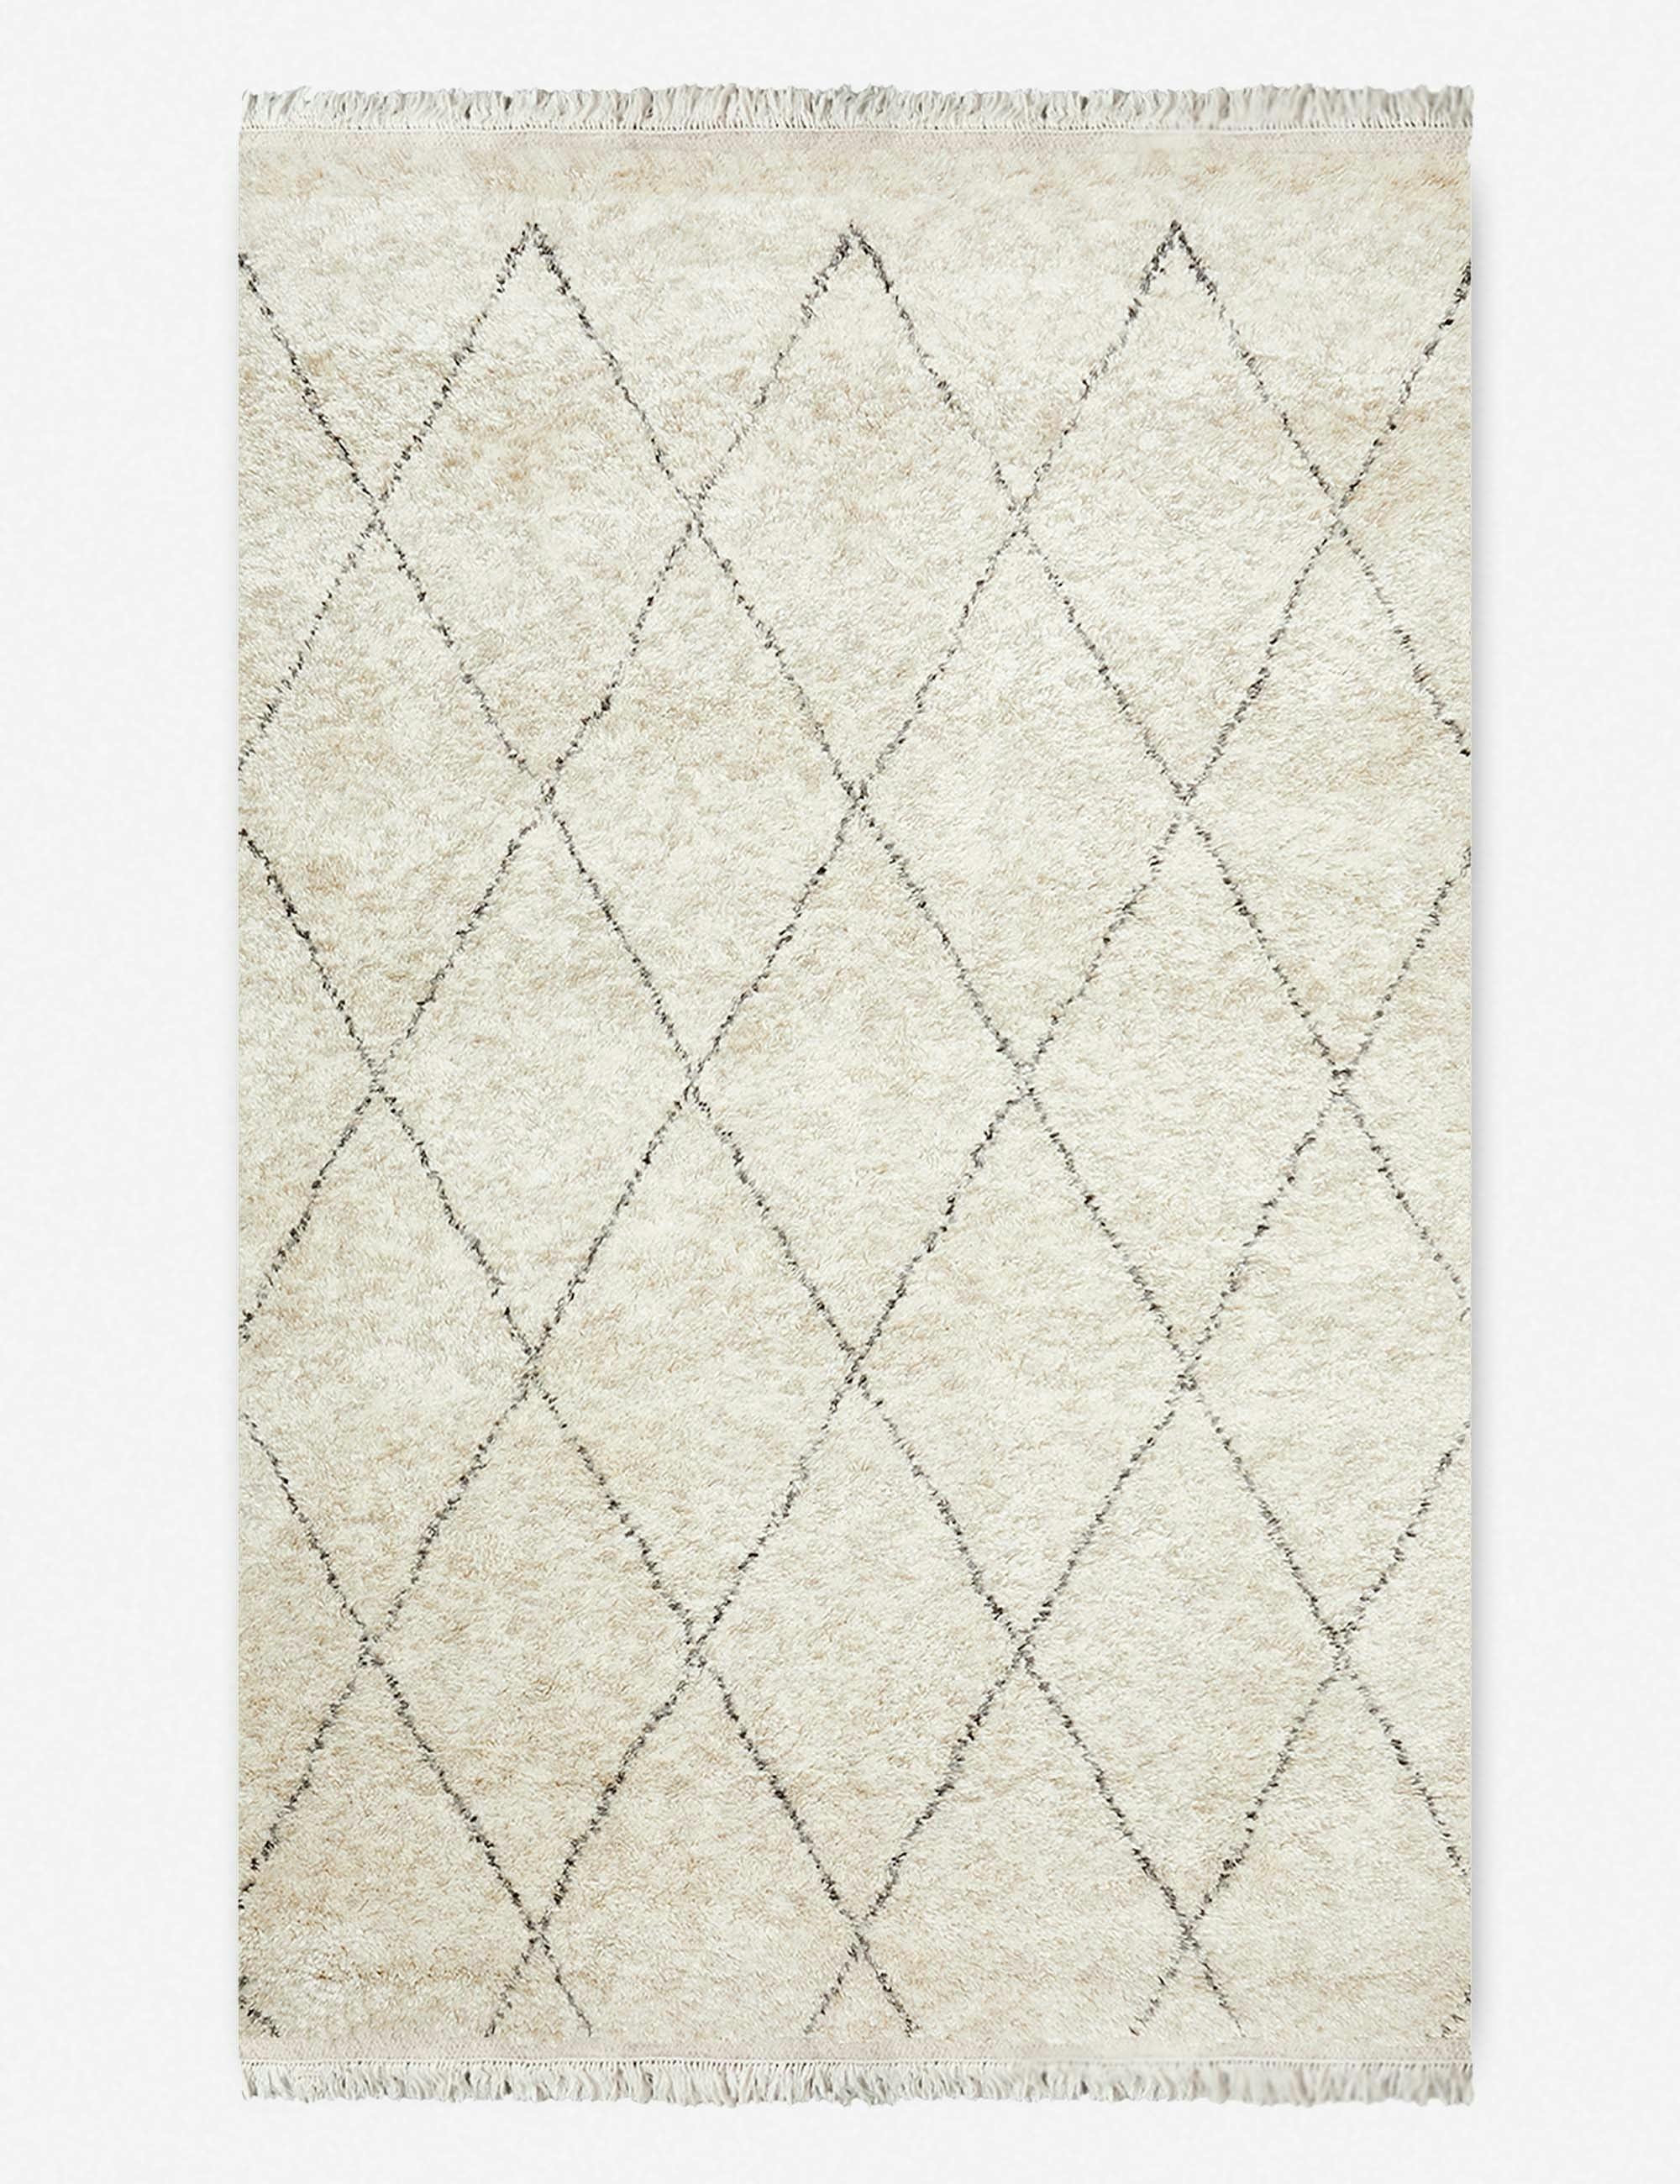 Ivory Wool-Viscose Blend Hand-Knotted Moroccan Shag Rug - 8' x 10'